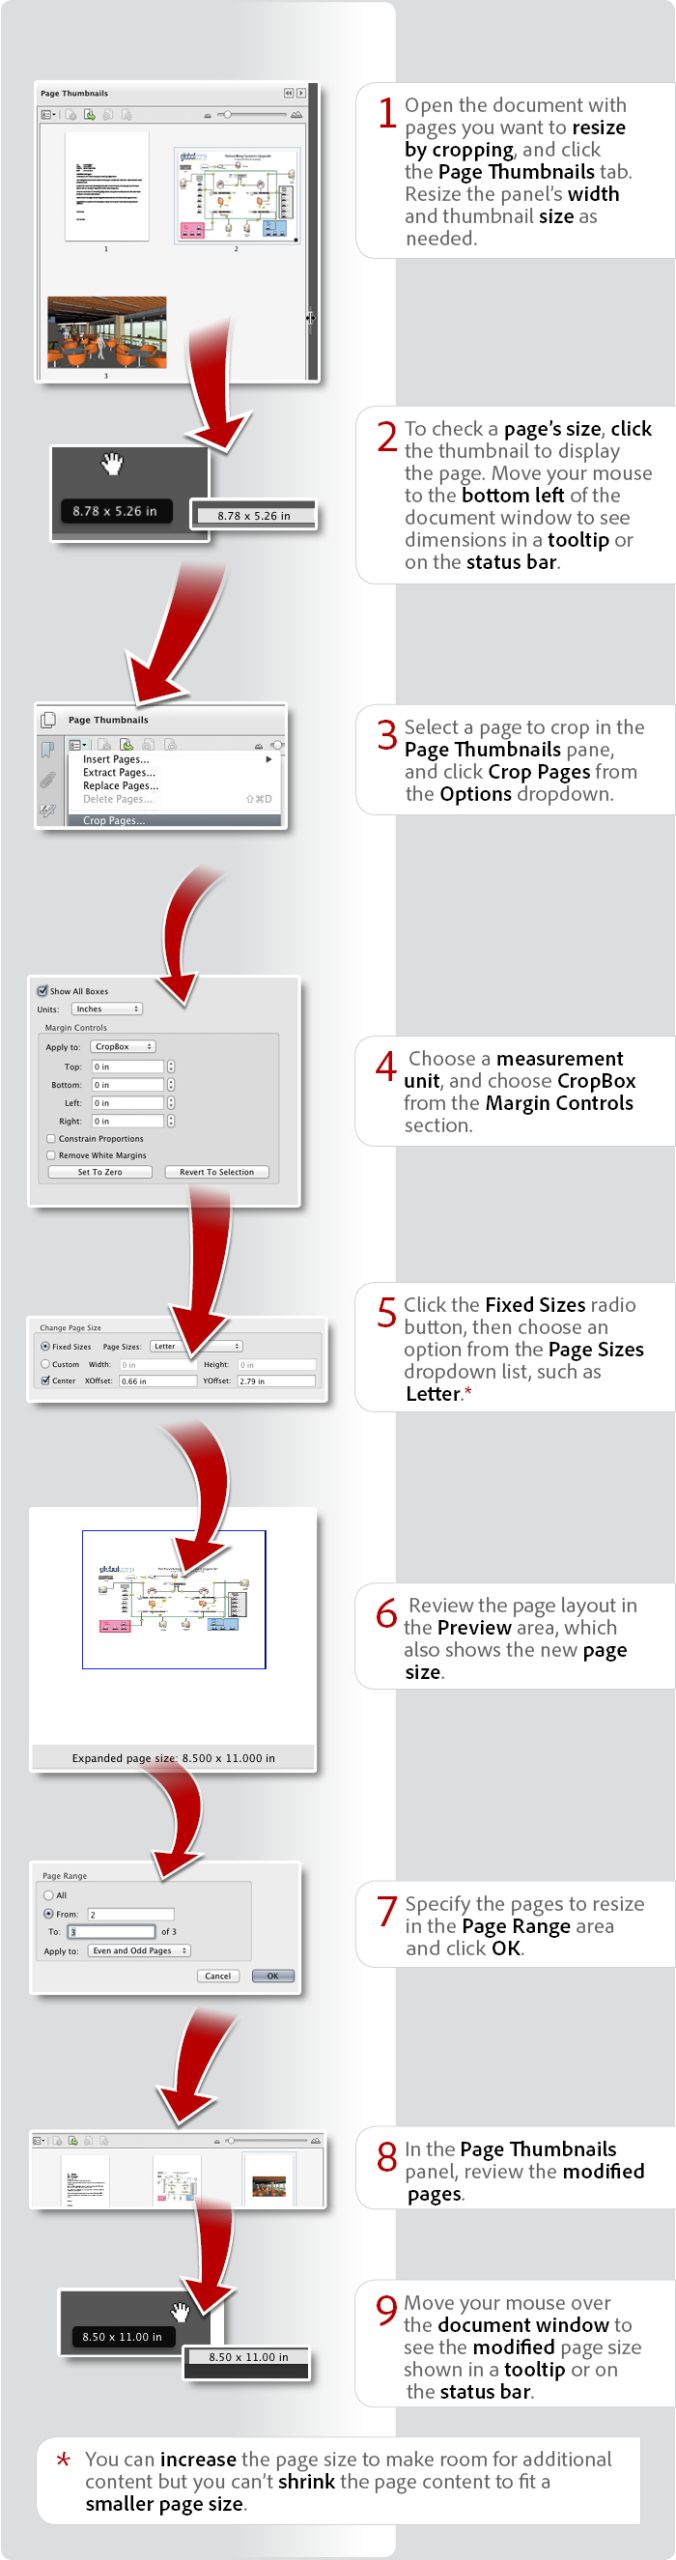 How to Markup a PDF in Adobe Reader: A Complete Guide